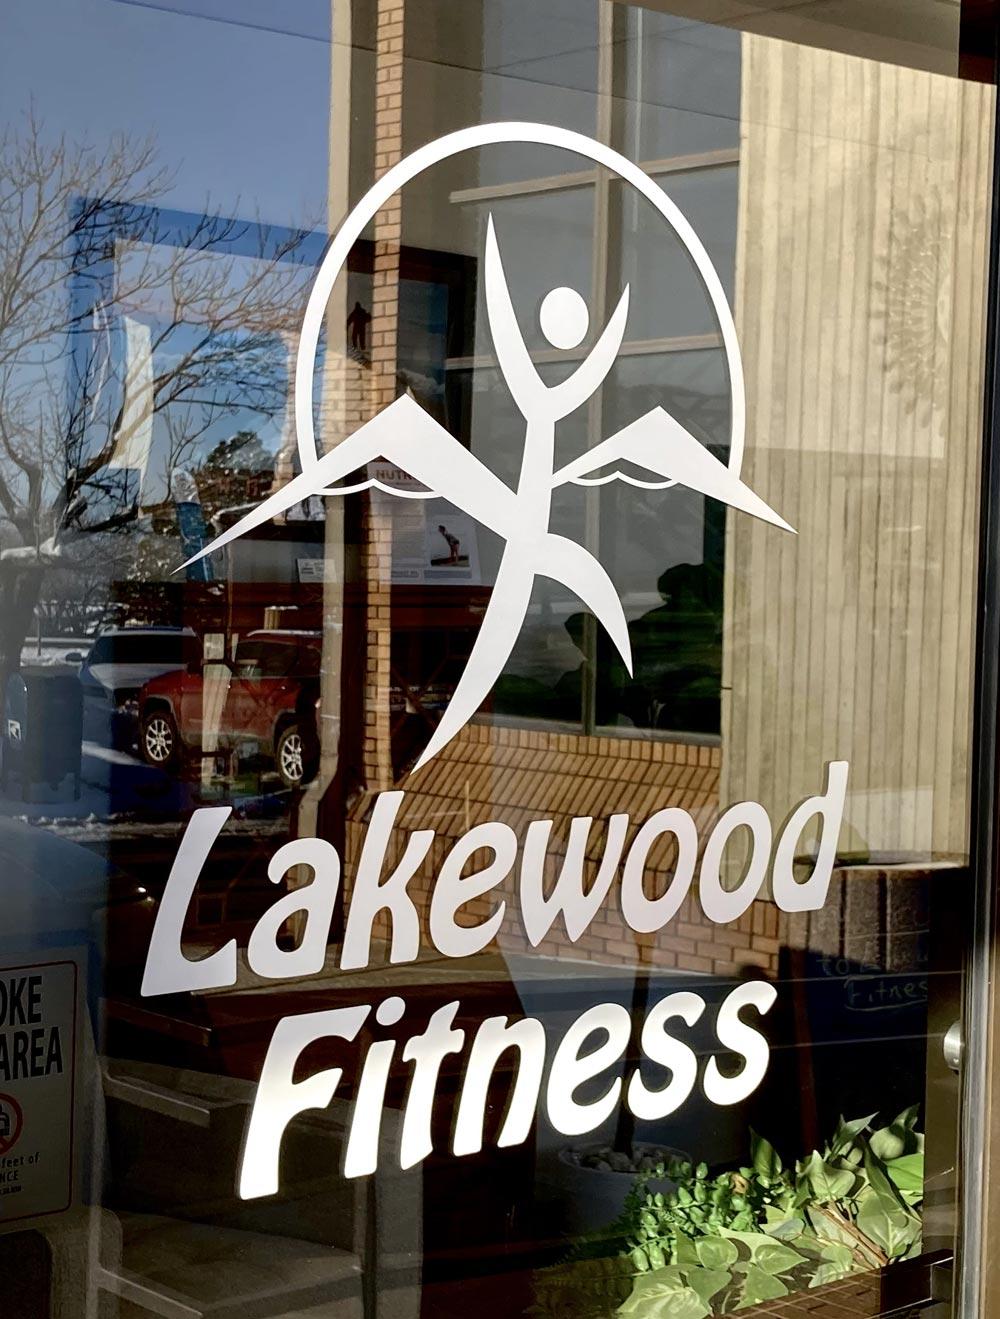 Lakewood Fitness - logo on our front door